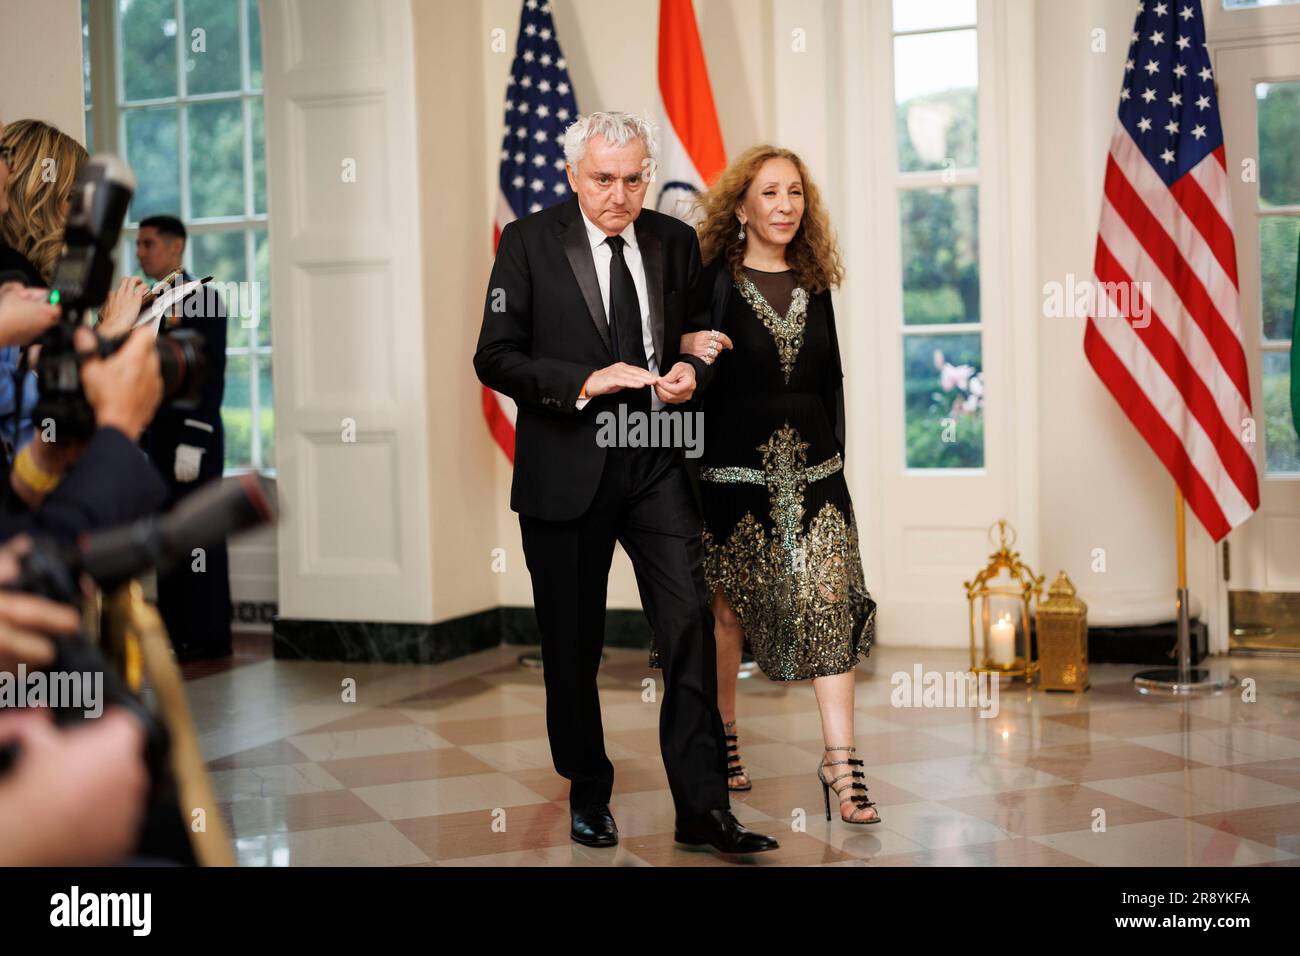 Washington, United States. 22nd June, 2023. Designer Reem Acra, right, and Nicolas Tabbal, arrive to attend a state dinner in honor of Indian Prime Minister Narendra Modi hosted by US President Joe Biden and First Lady Jill Biden at the White House in Washington, DC on Thursday, June 22, 2023. Biden and Modi announced a series of defense and commercial deals designed to improve military and economic ties between their nations during a state visit at the White House today. Photo by Ting Shen/UPI Credit: UPI/Alamy Live News Stock Photo